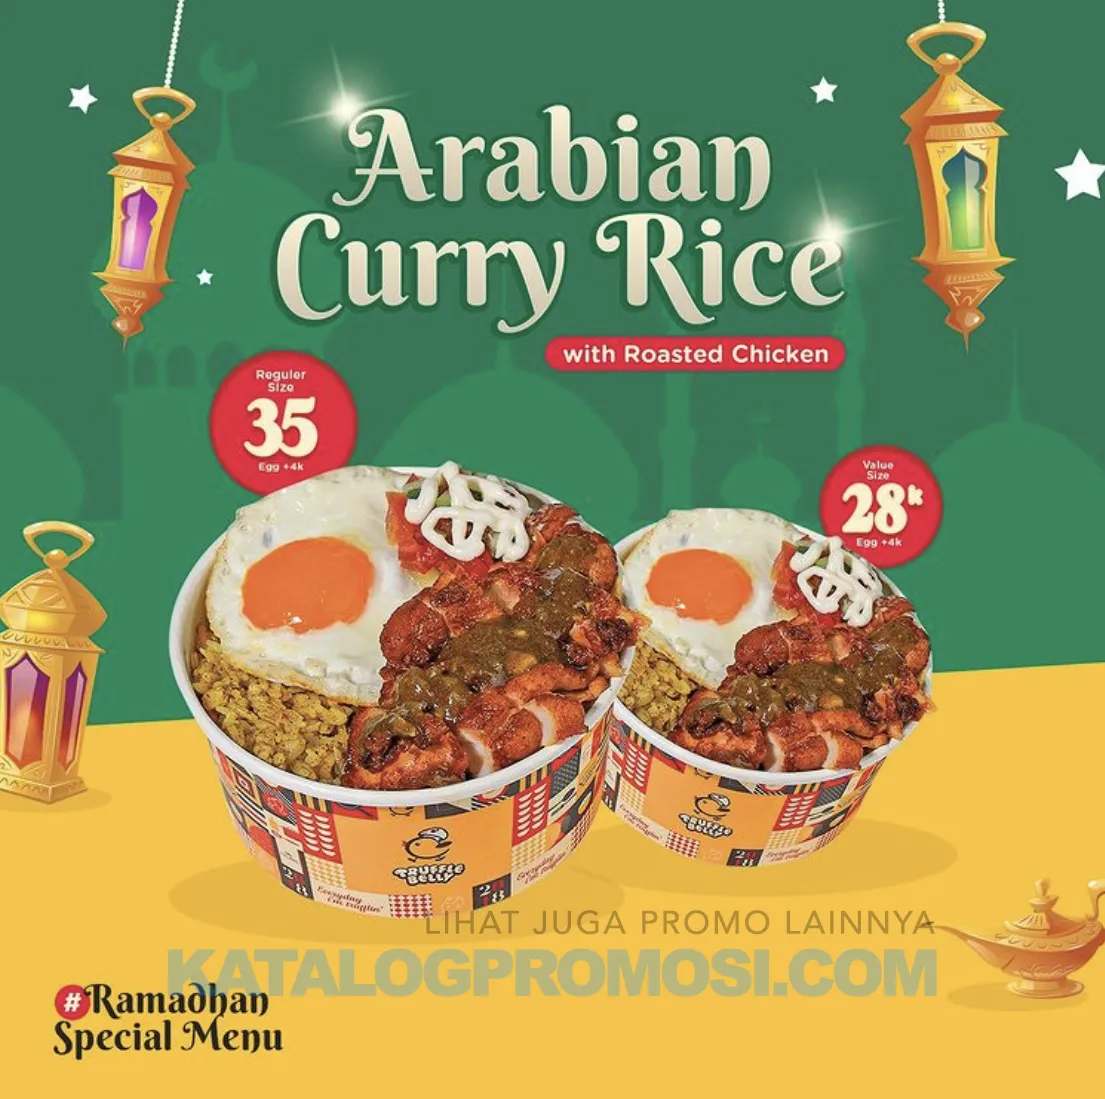 Promo Truffle Belly Ramadhan Special Menu - Arabian Curry Rice with Roasted Chicken